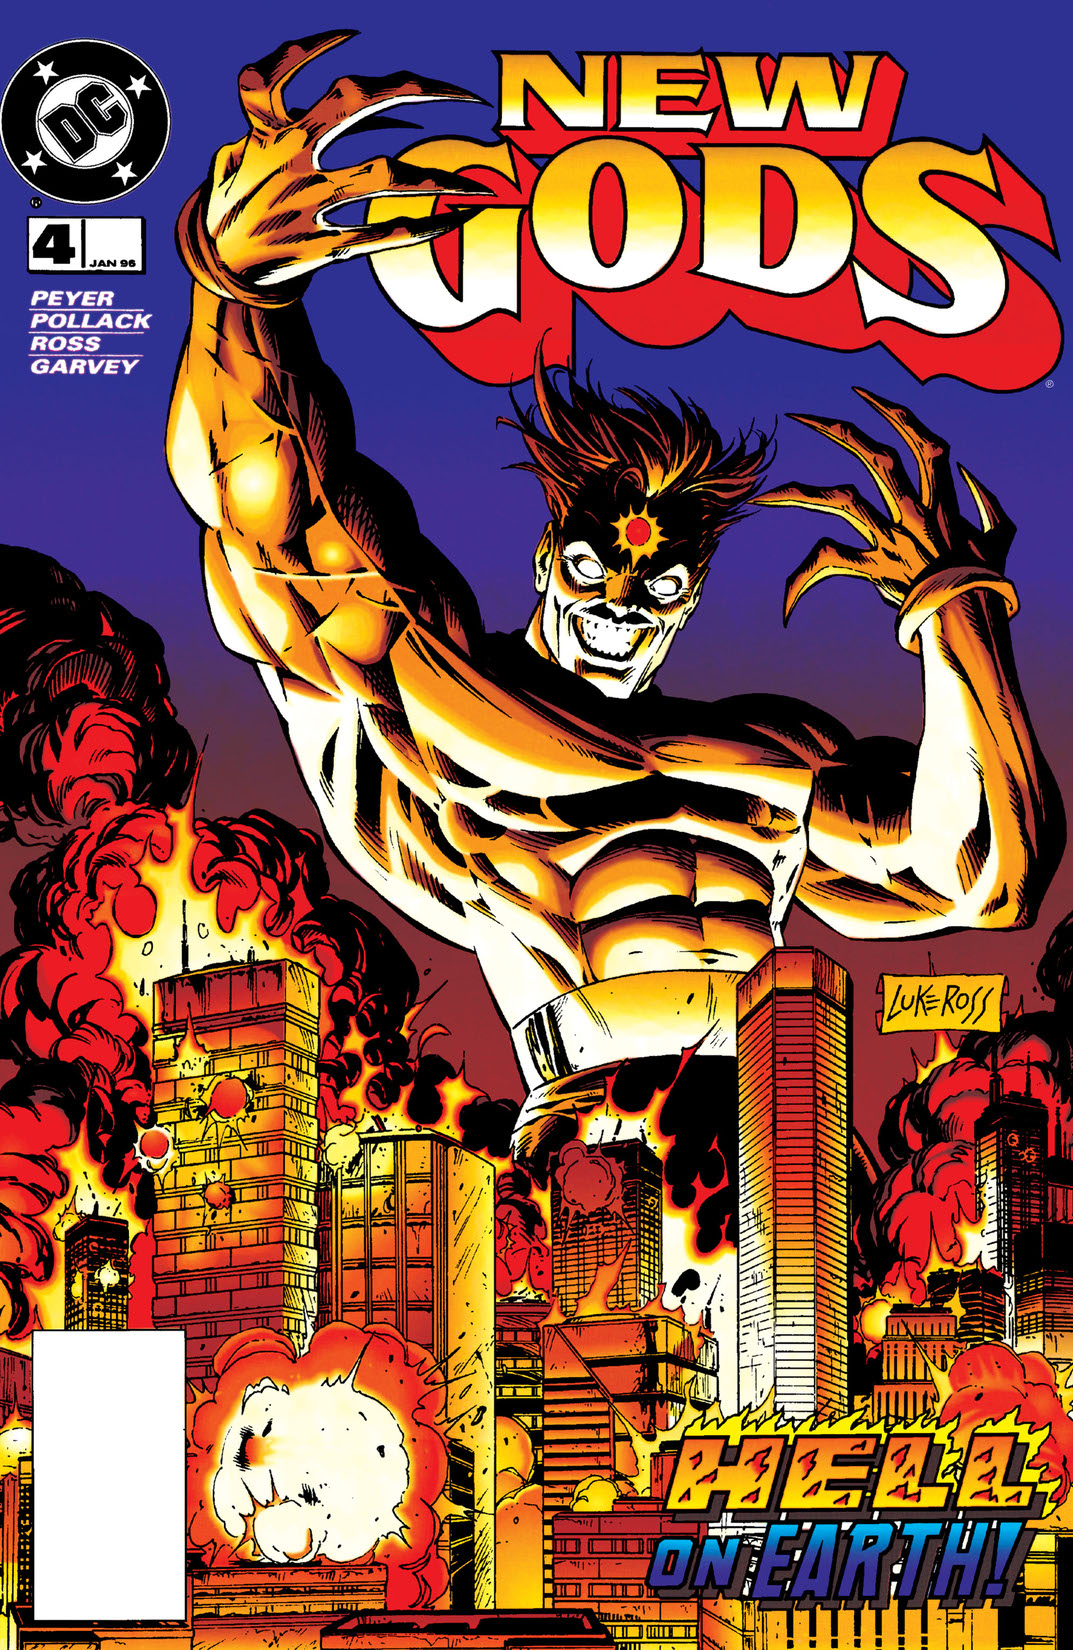 New Gods (1995-) #4 preview images